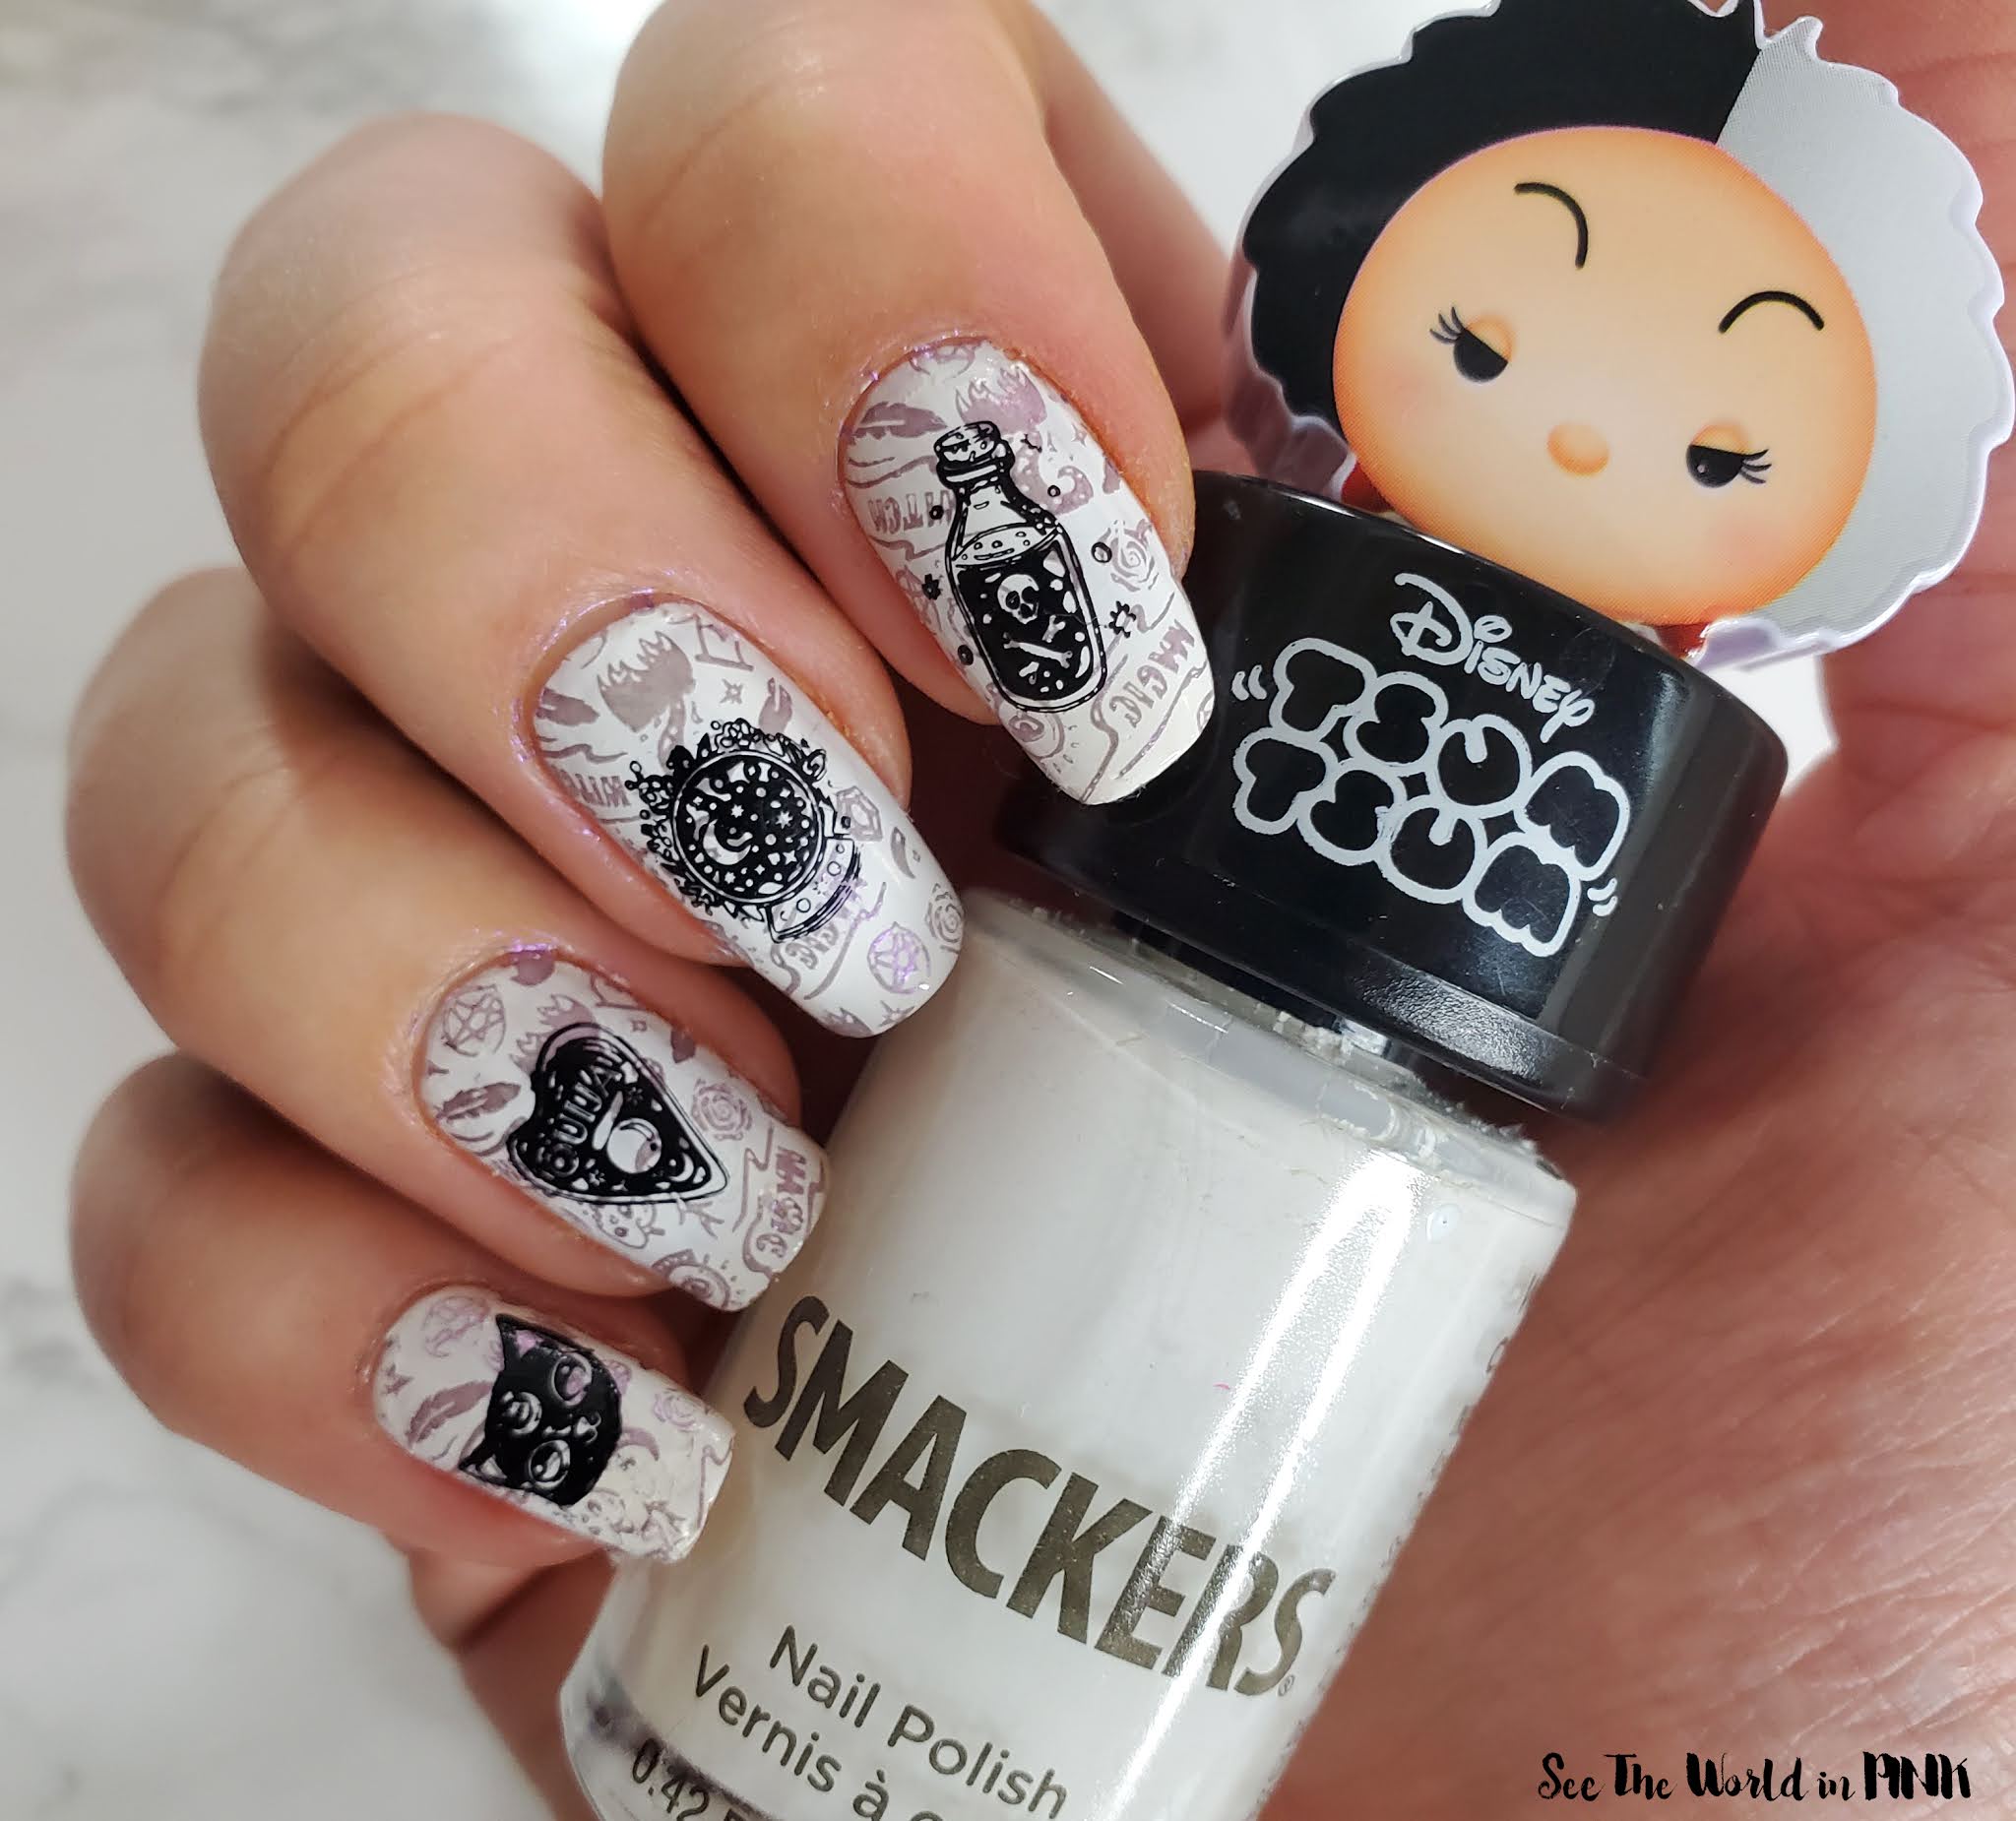 Manicure Monday - Stamped Halloween Nails